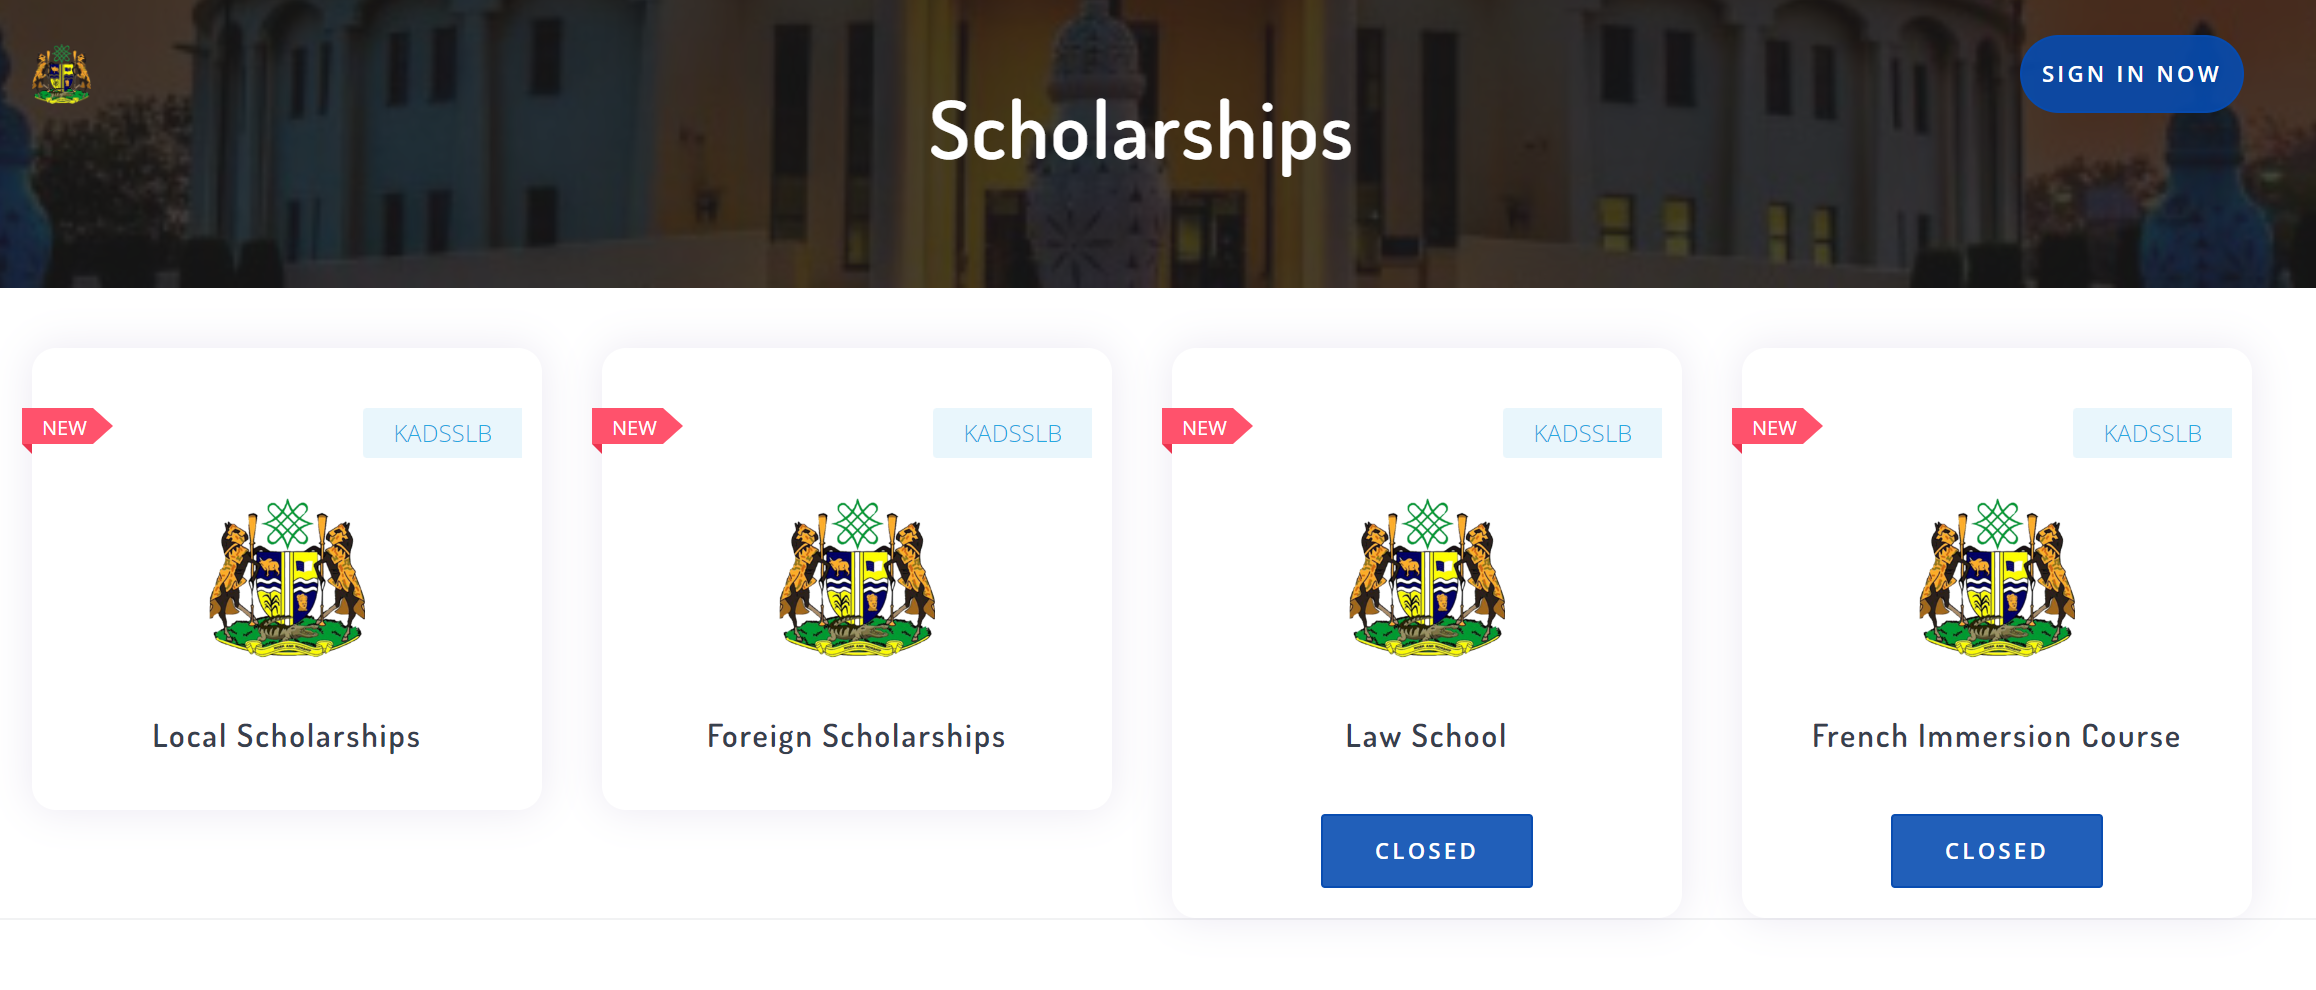 How to apply for KDSG Scholarship